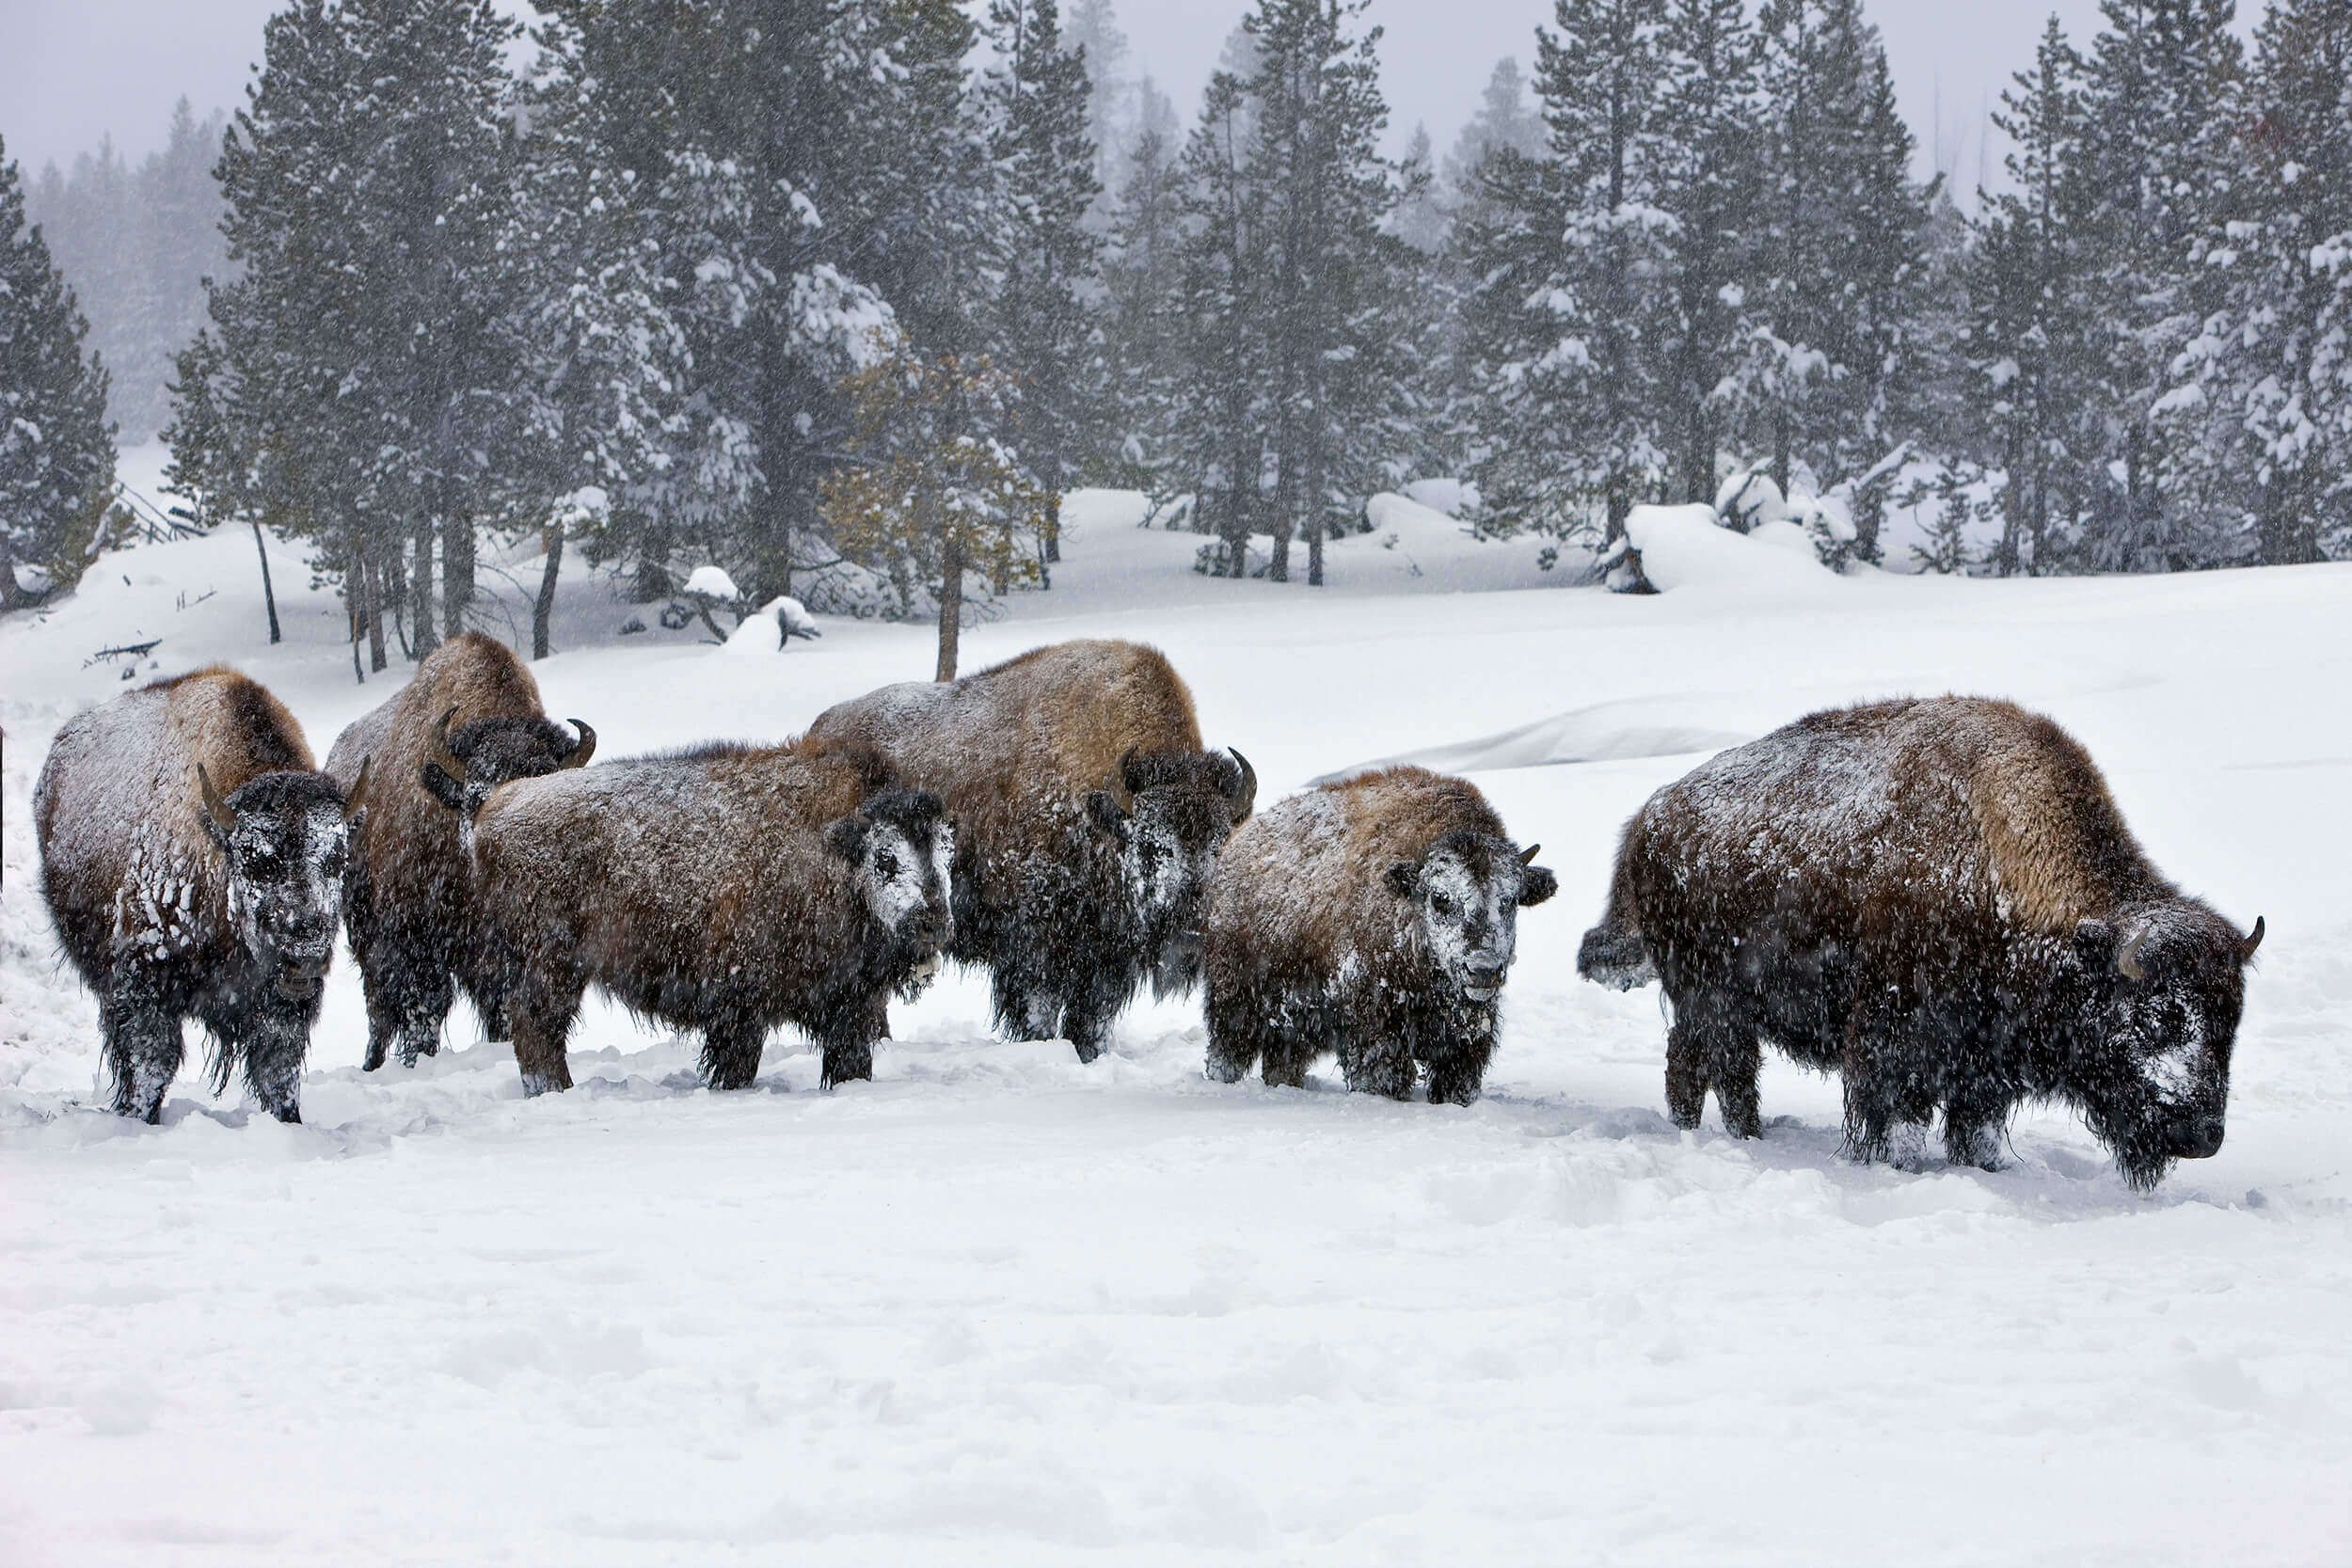 how do bison adapt to snow